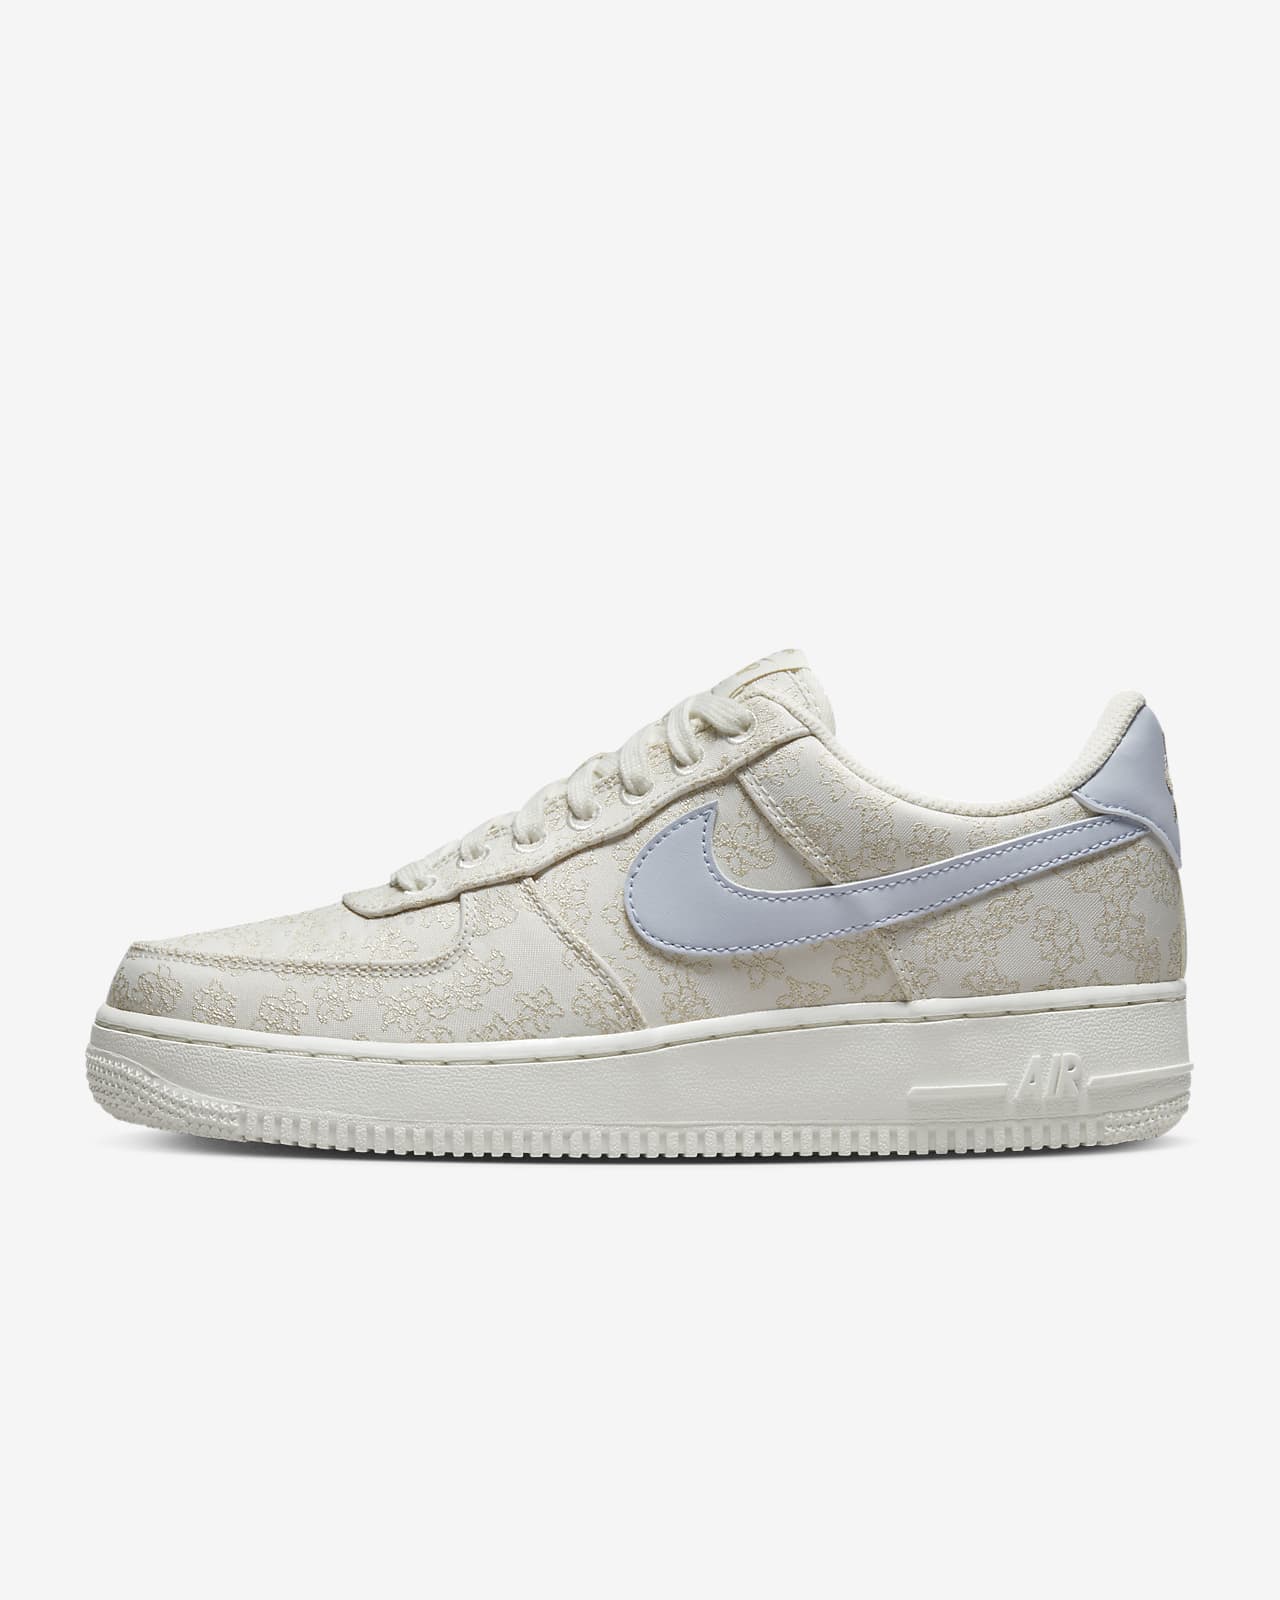 Nike Air Force 1 SE Women's Shoes.